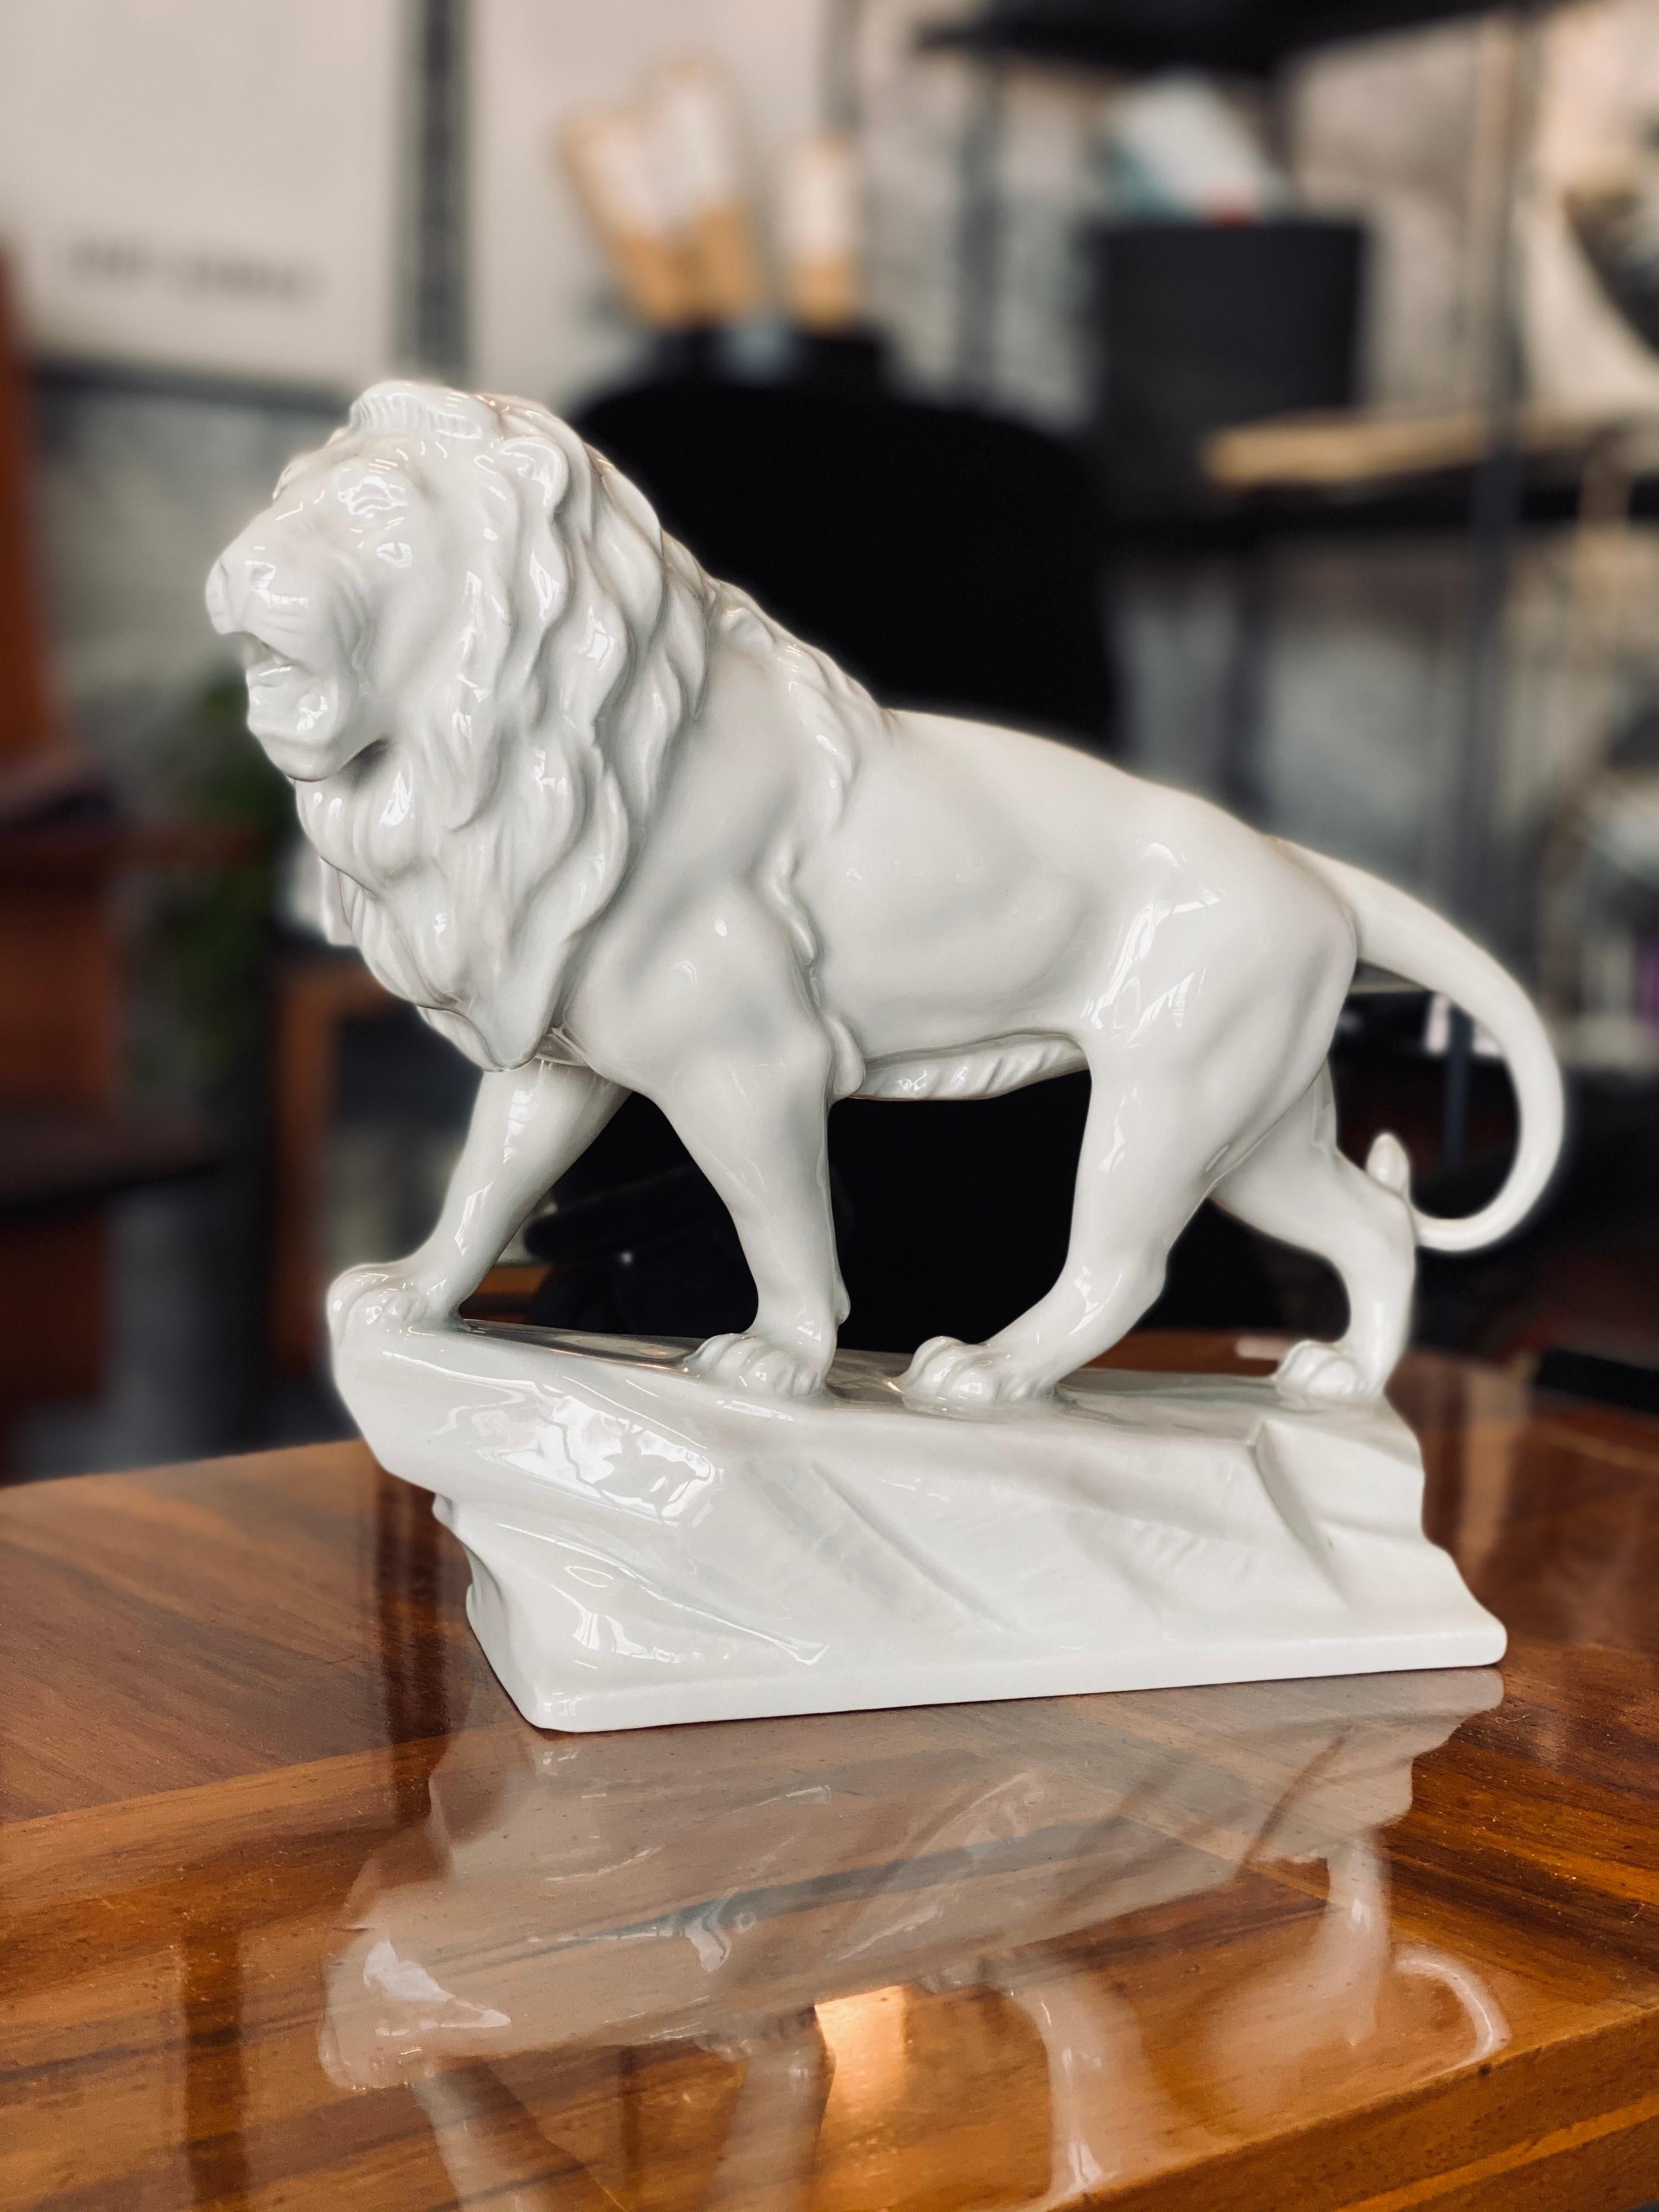 Lion sculpture from the middle of the 20th century. The figure is made of porcelain and in very good condition. The manufacturer is unknown.